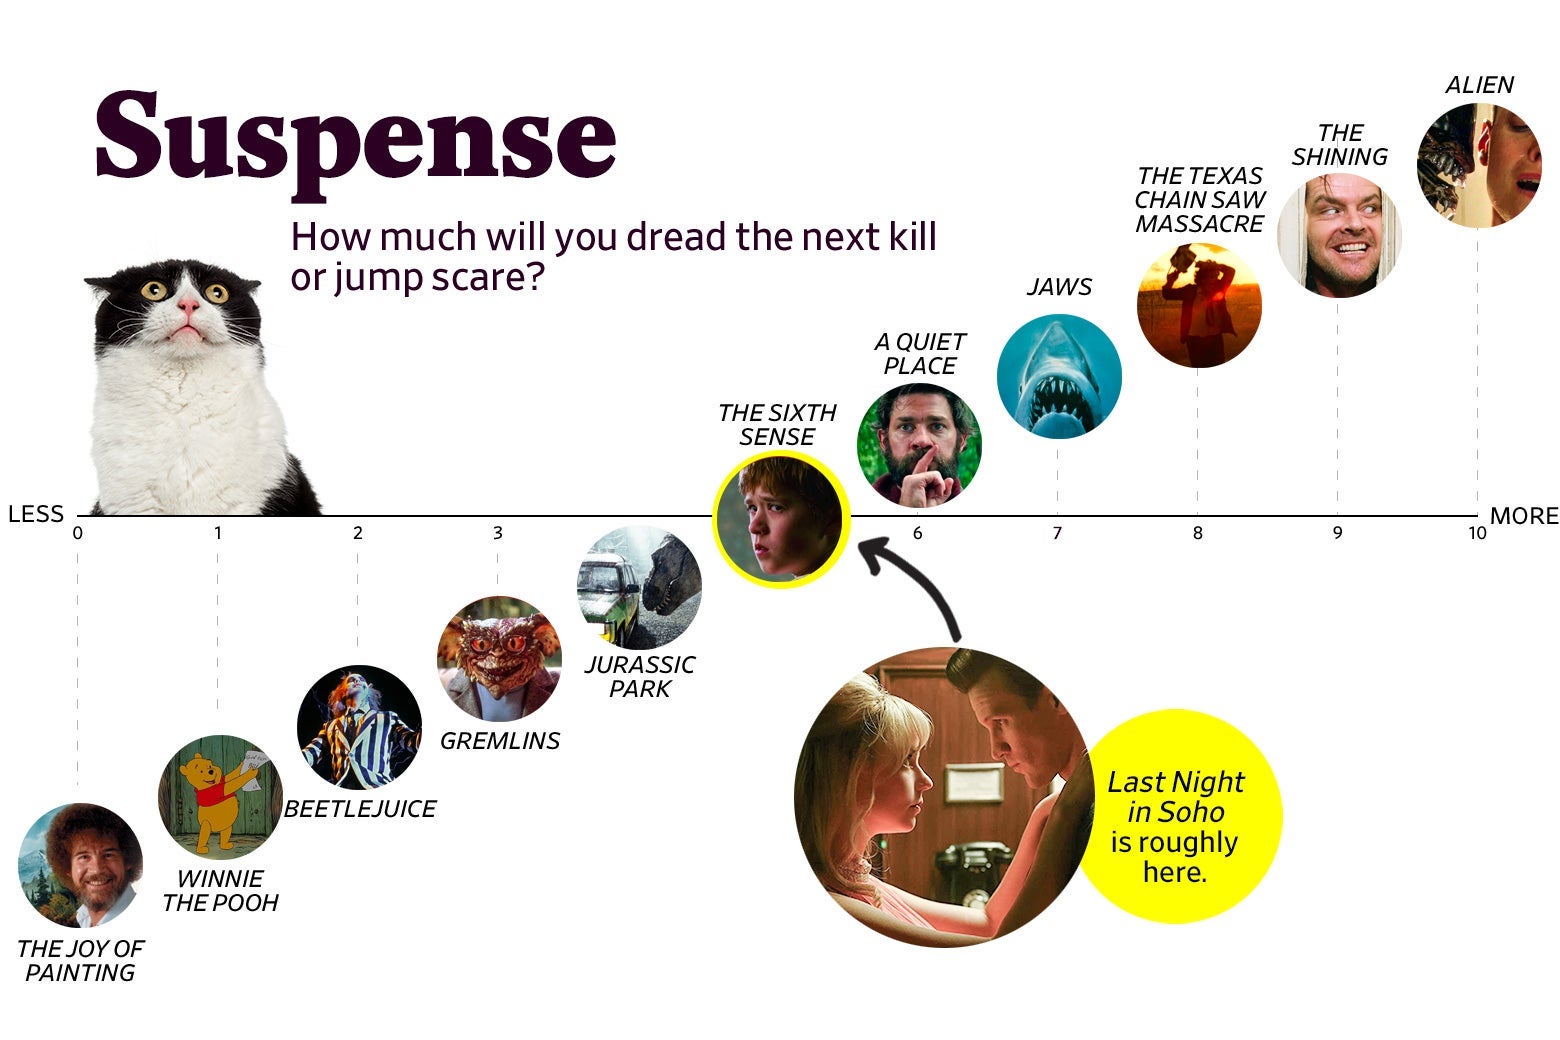 A chart titled “Suspense: How much will you dread the next kill or jump scare?” shows that Last Night in Soho ranks a 5 in suspense, roughly the same as The Sixth Sense. The scale ranges from The Joy of Painting (0) to Alien (10).  